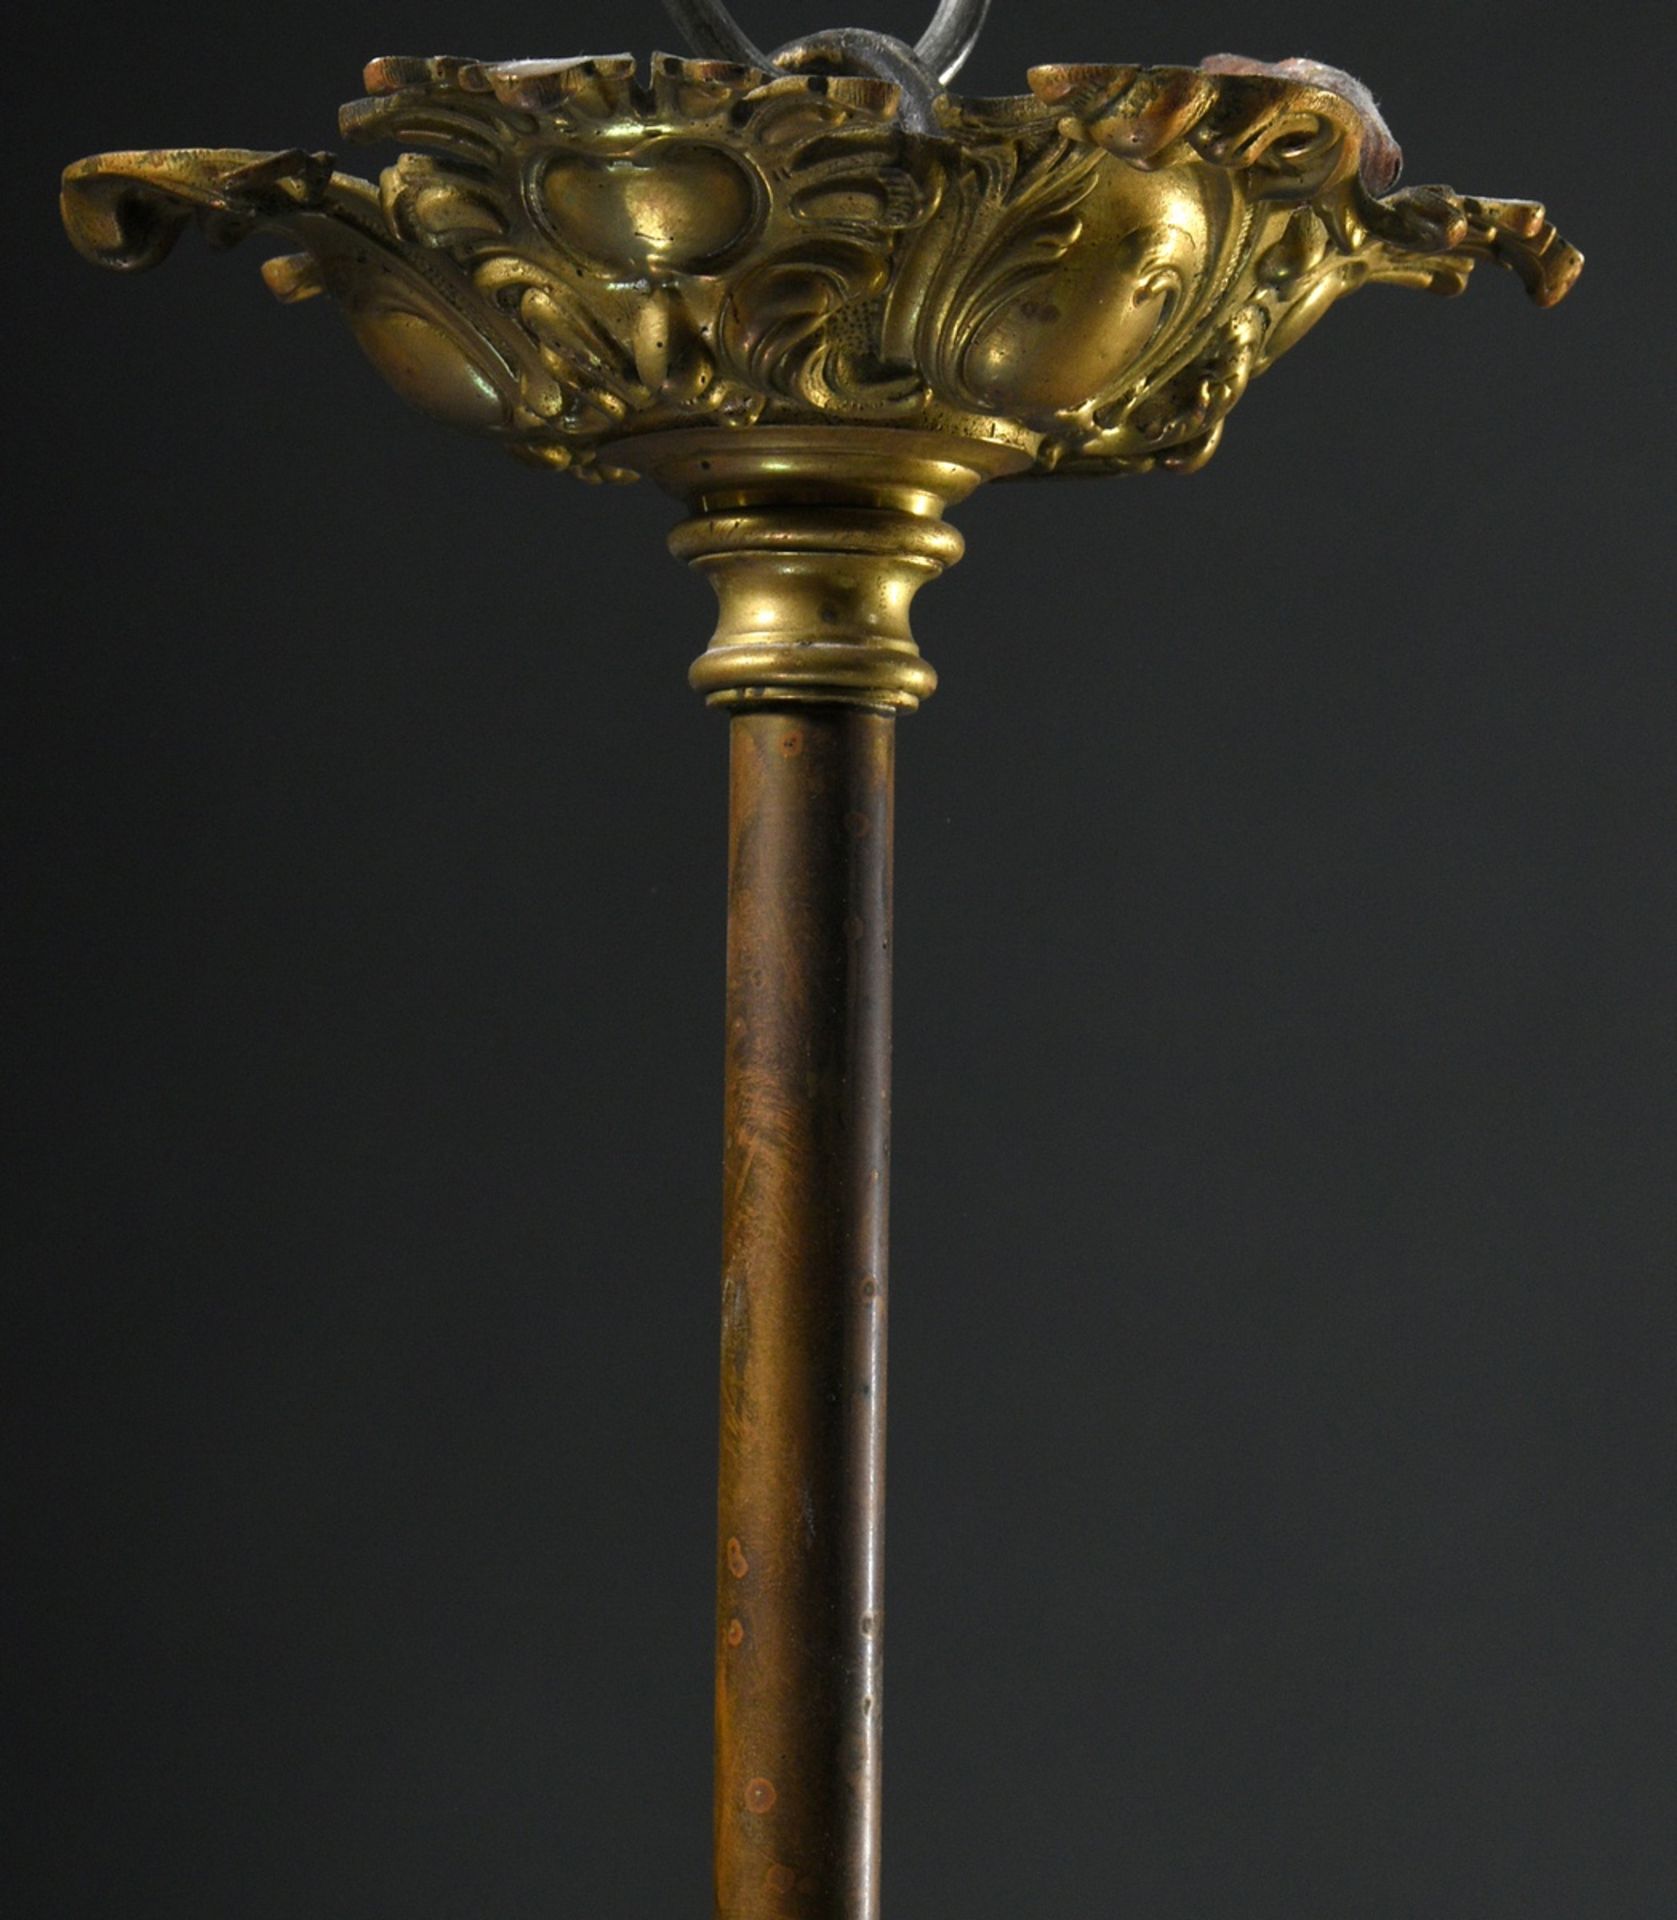 Wilhelminian period ceiling lamp with 4 frosted "flames" glass domes on brass frame with floral dec - Image 11 of 12